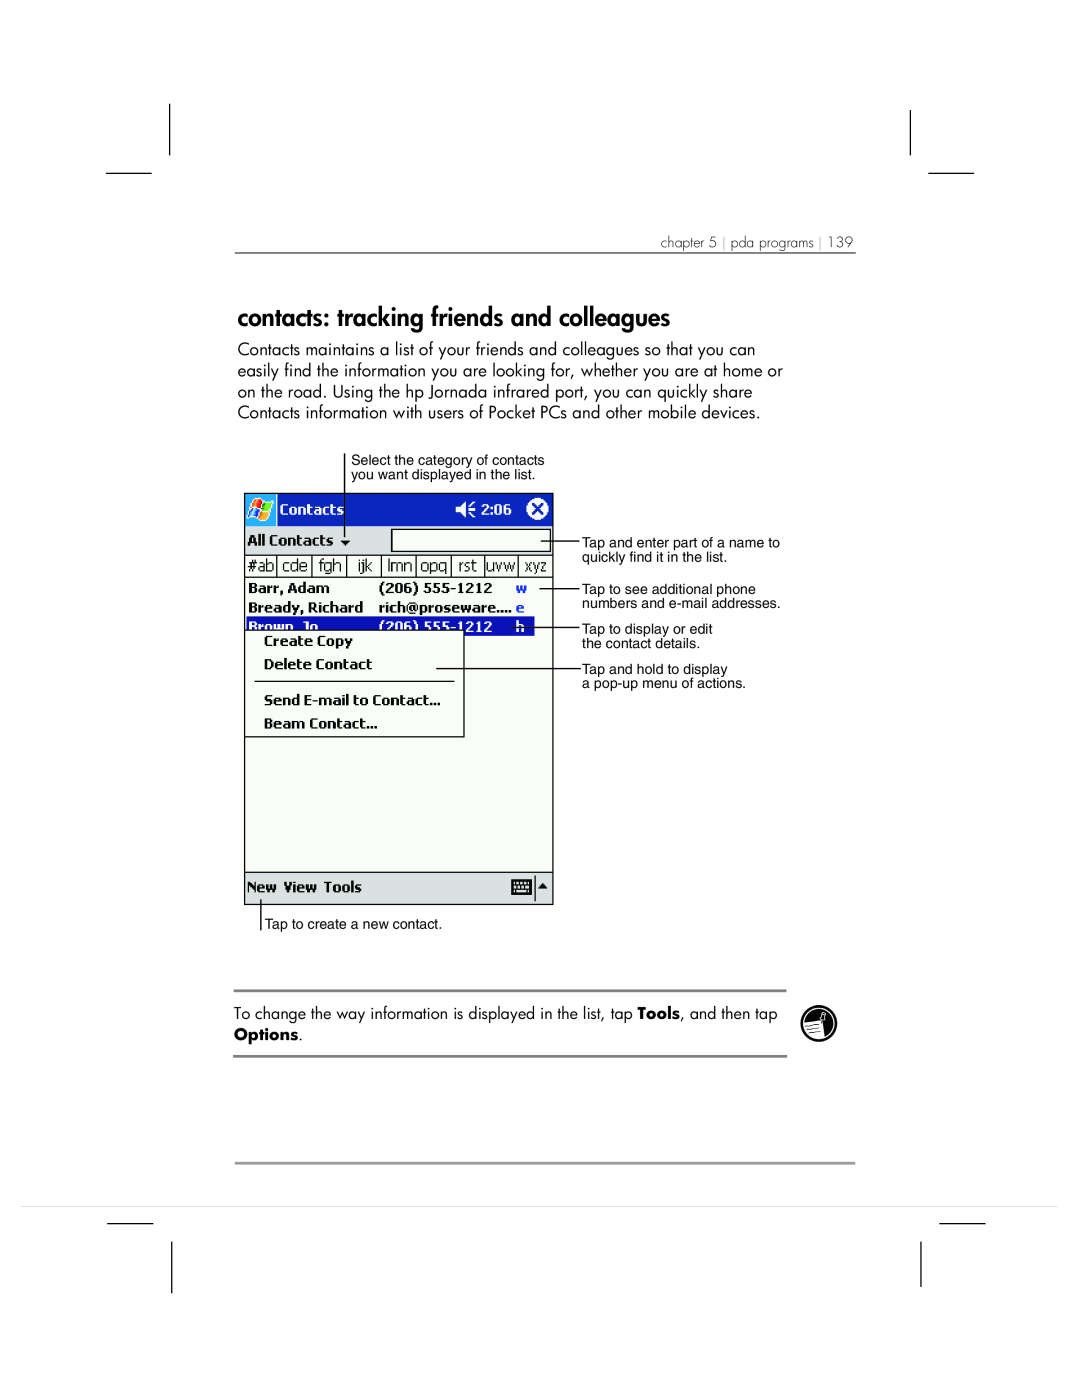 HP 920 manual contacts tracking friends and colleagues 